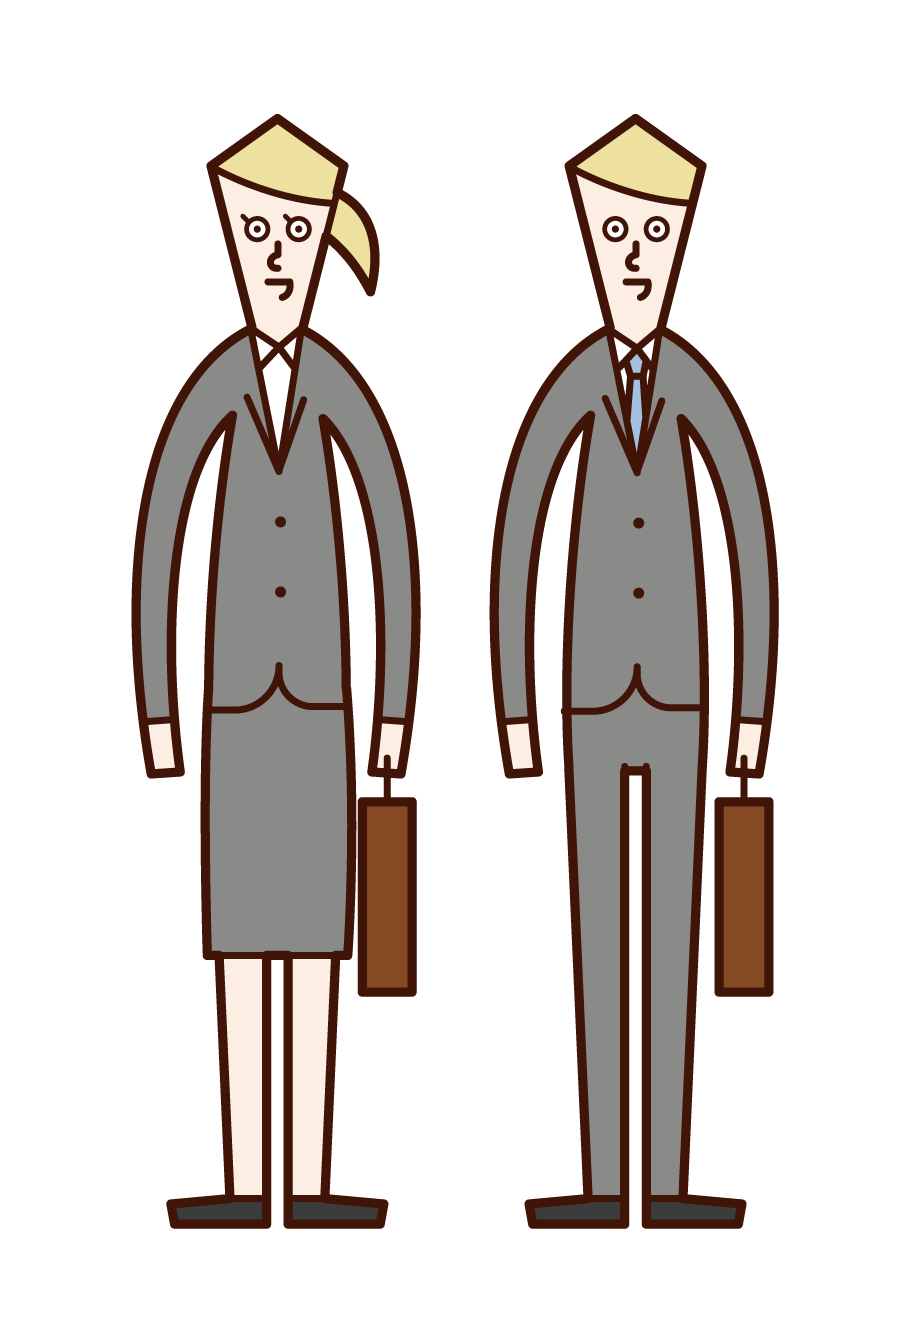 Illustration of a working couple